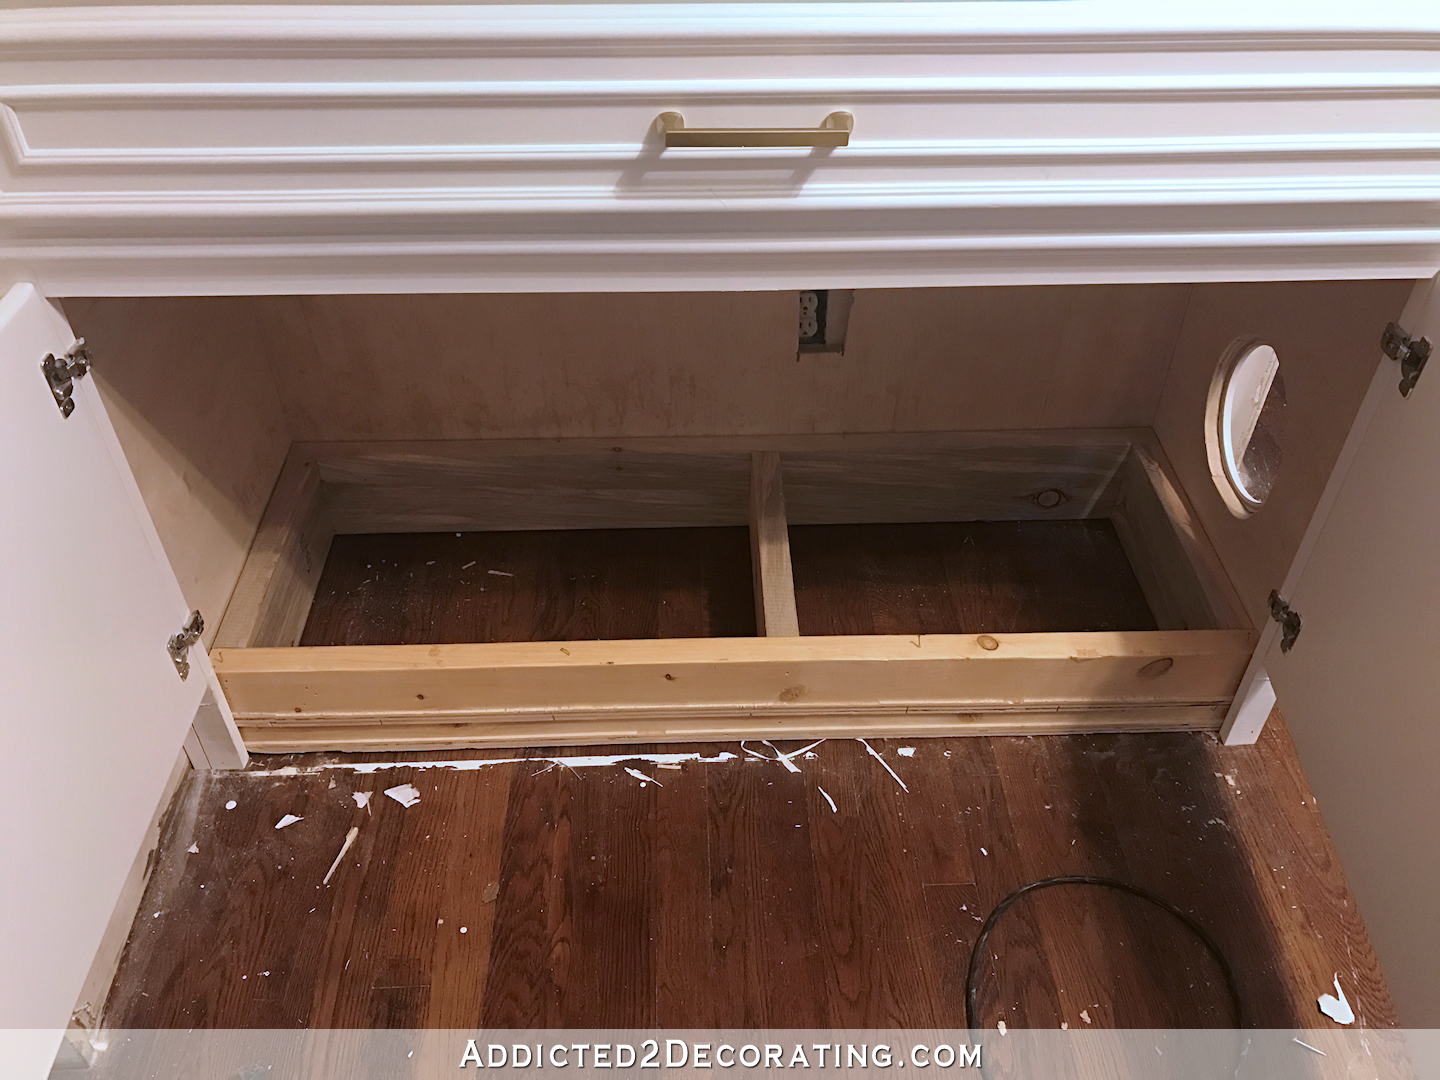 improper planning before buidling cabinets - removal of bottom rail and plywood base